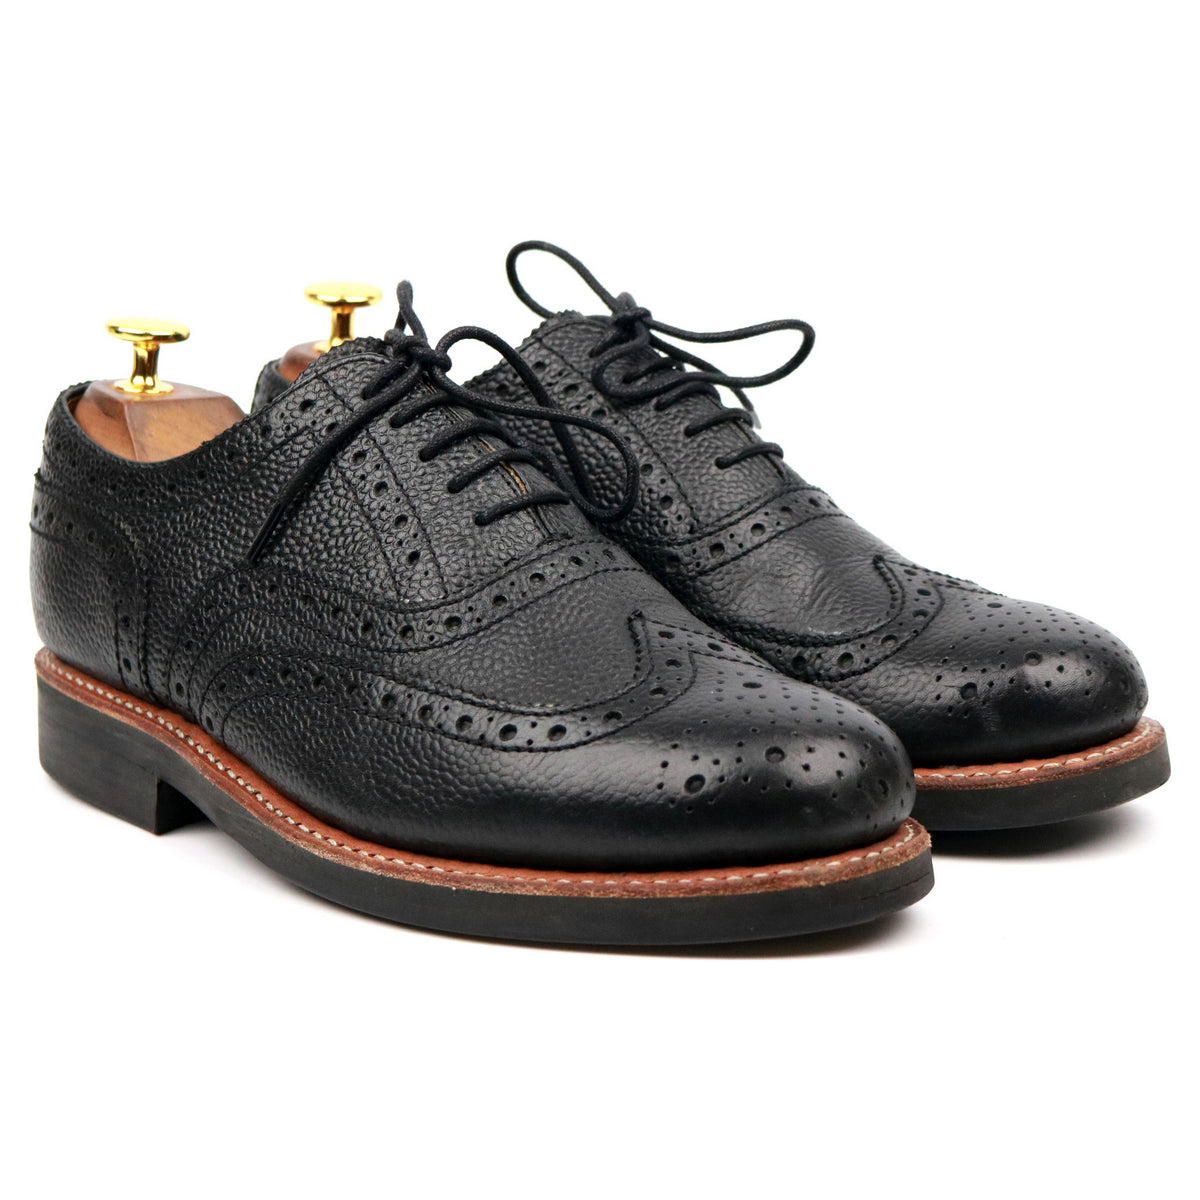 Grenson 'Stanley' Black Leather Brogues 